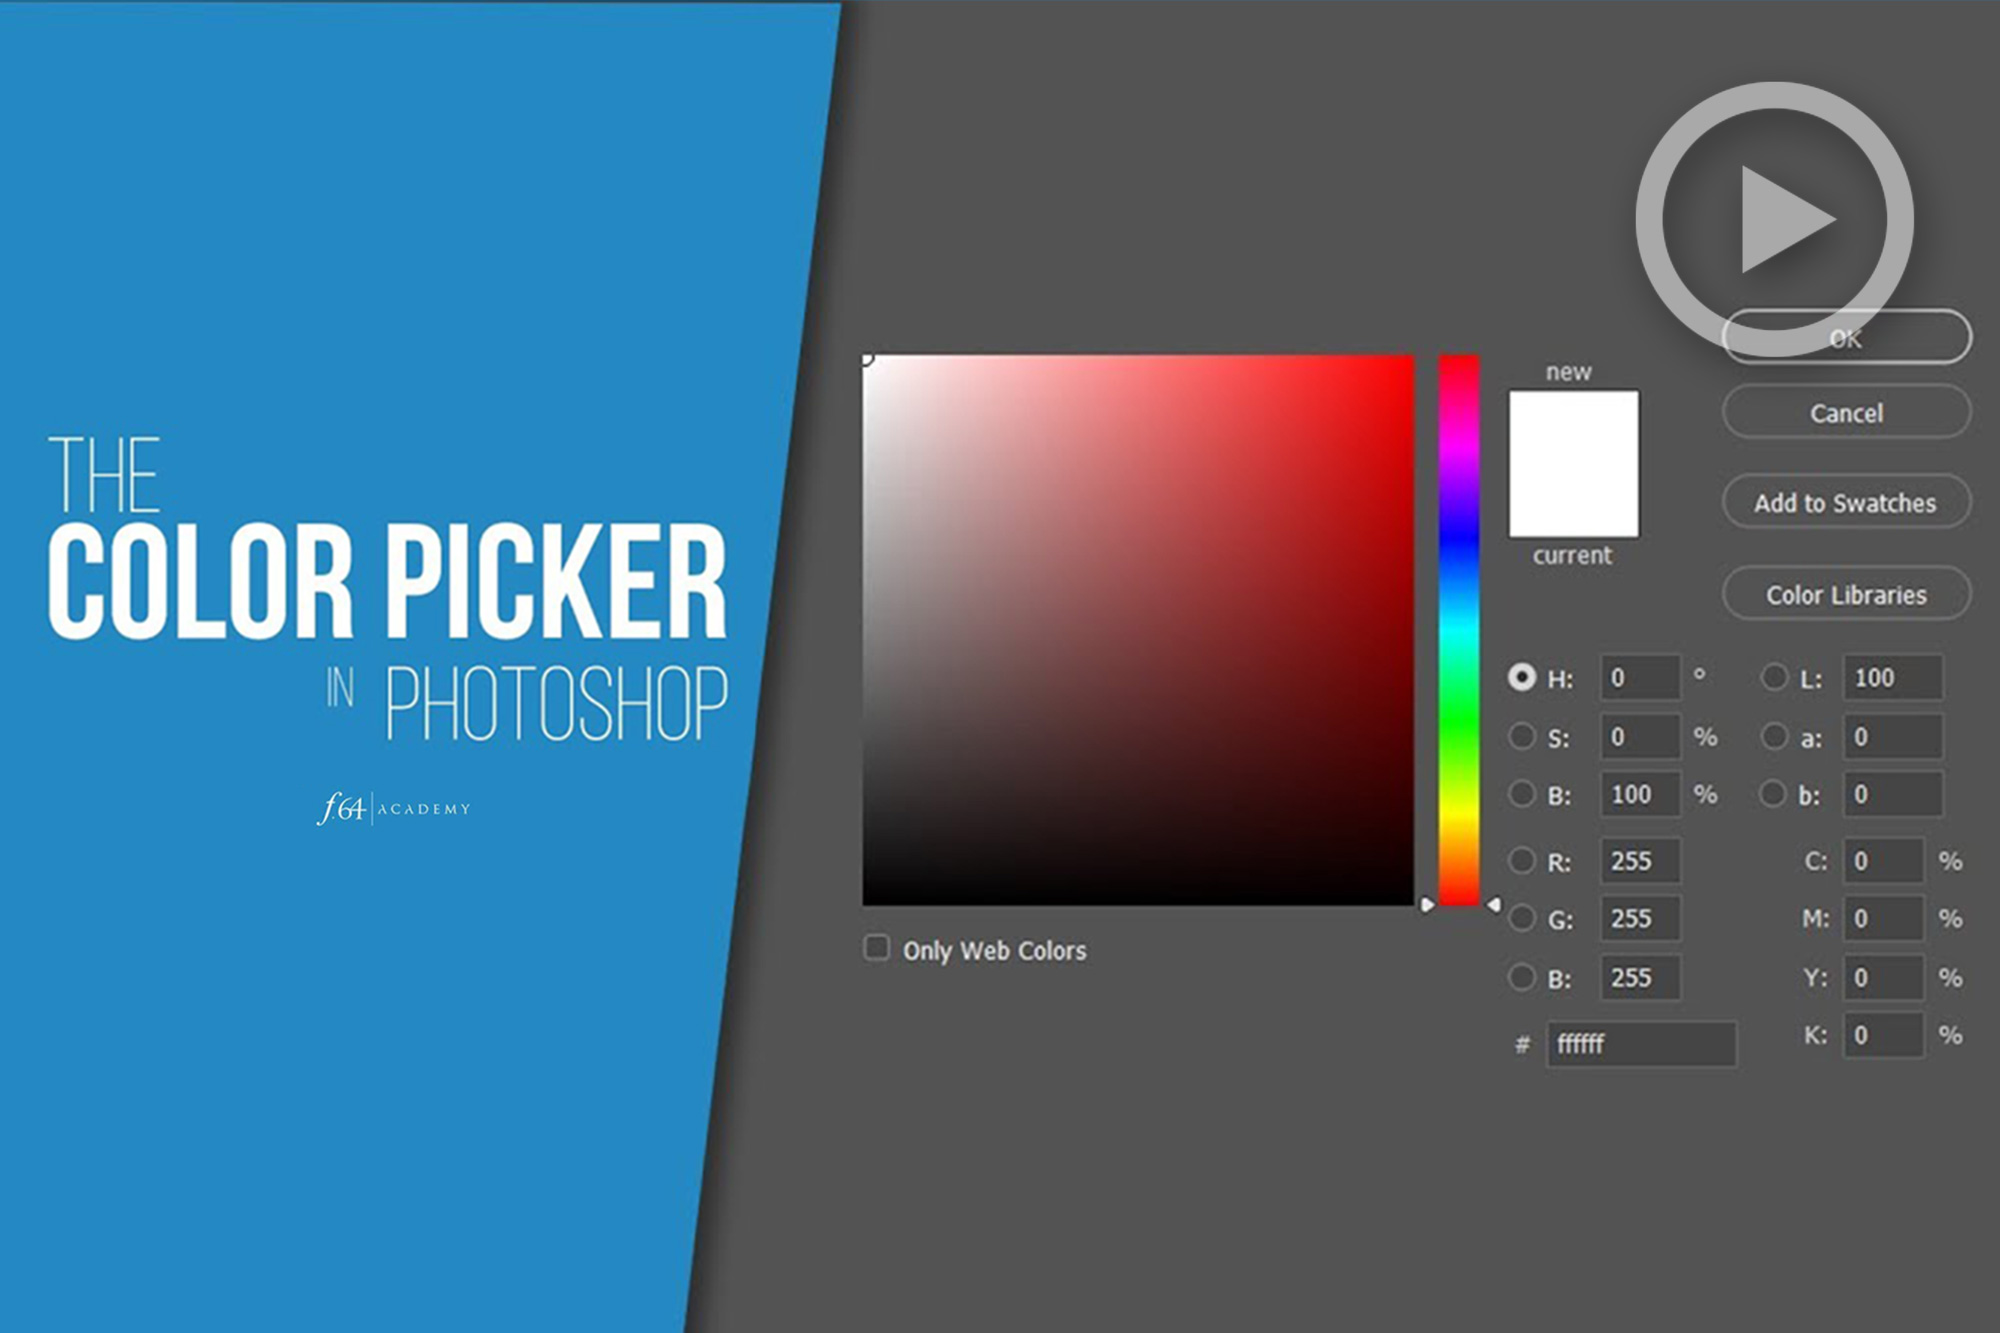 Photoshop Tips How To Use The Color Picker Tool Coloring Wallpapers Download Free Images Wallpaper [coloring654.blogspot.com]